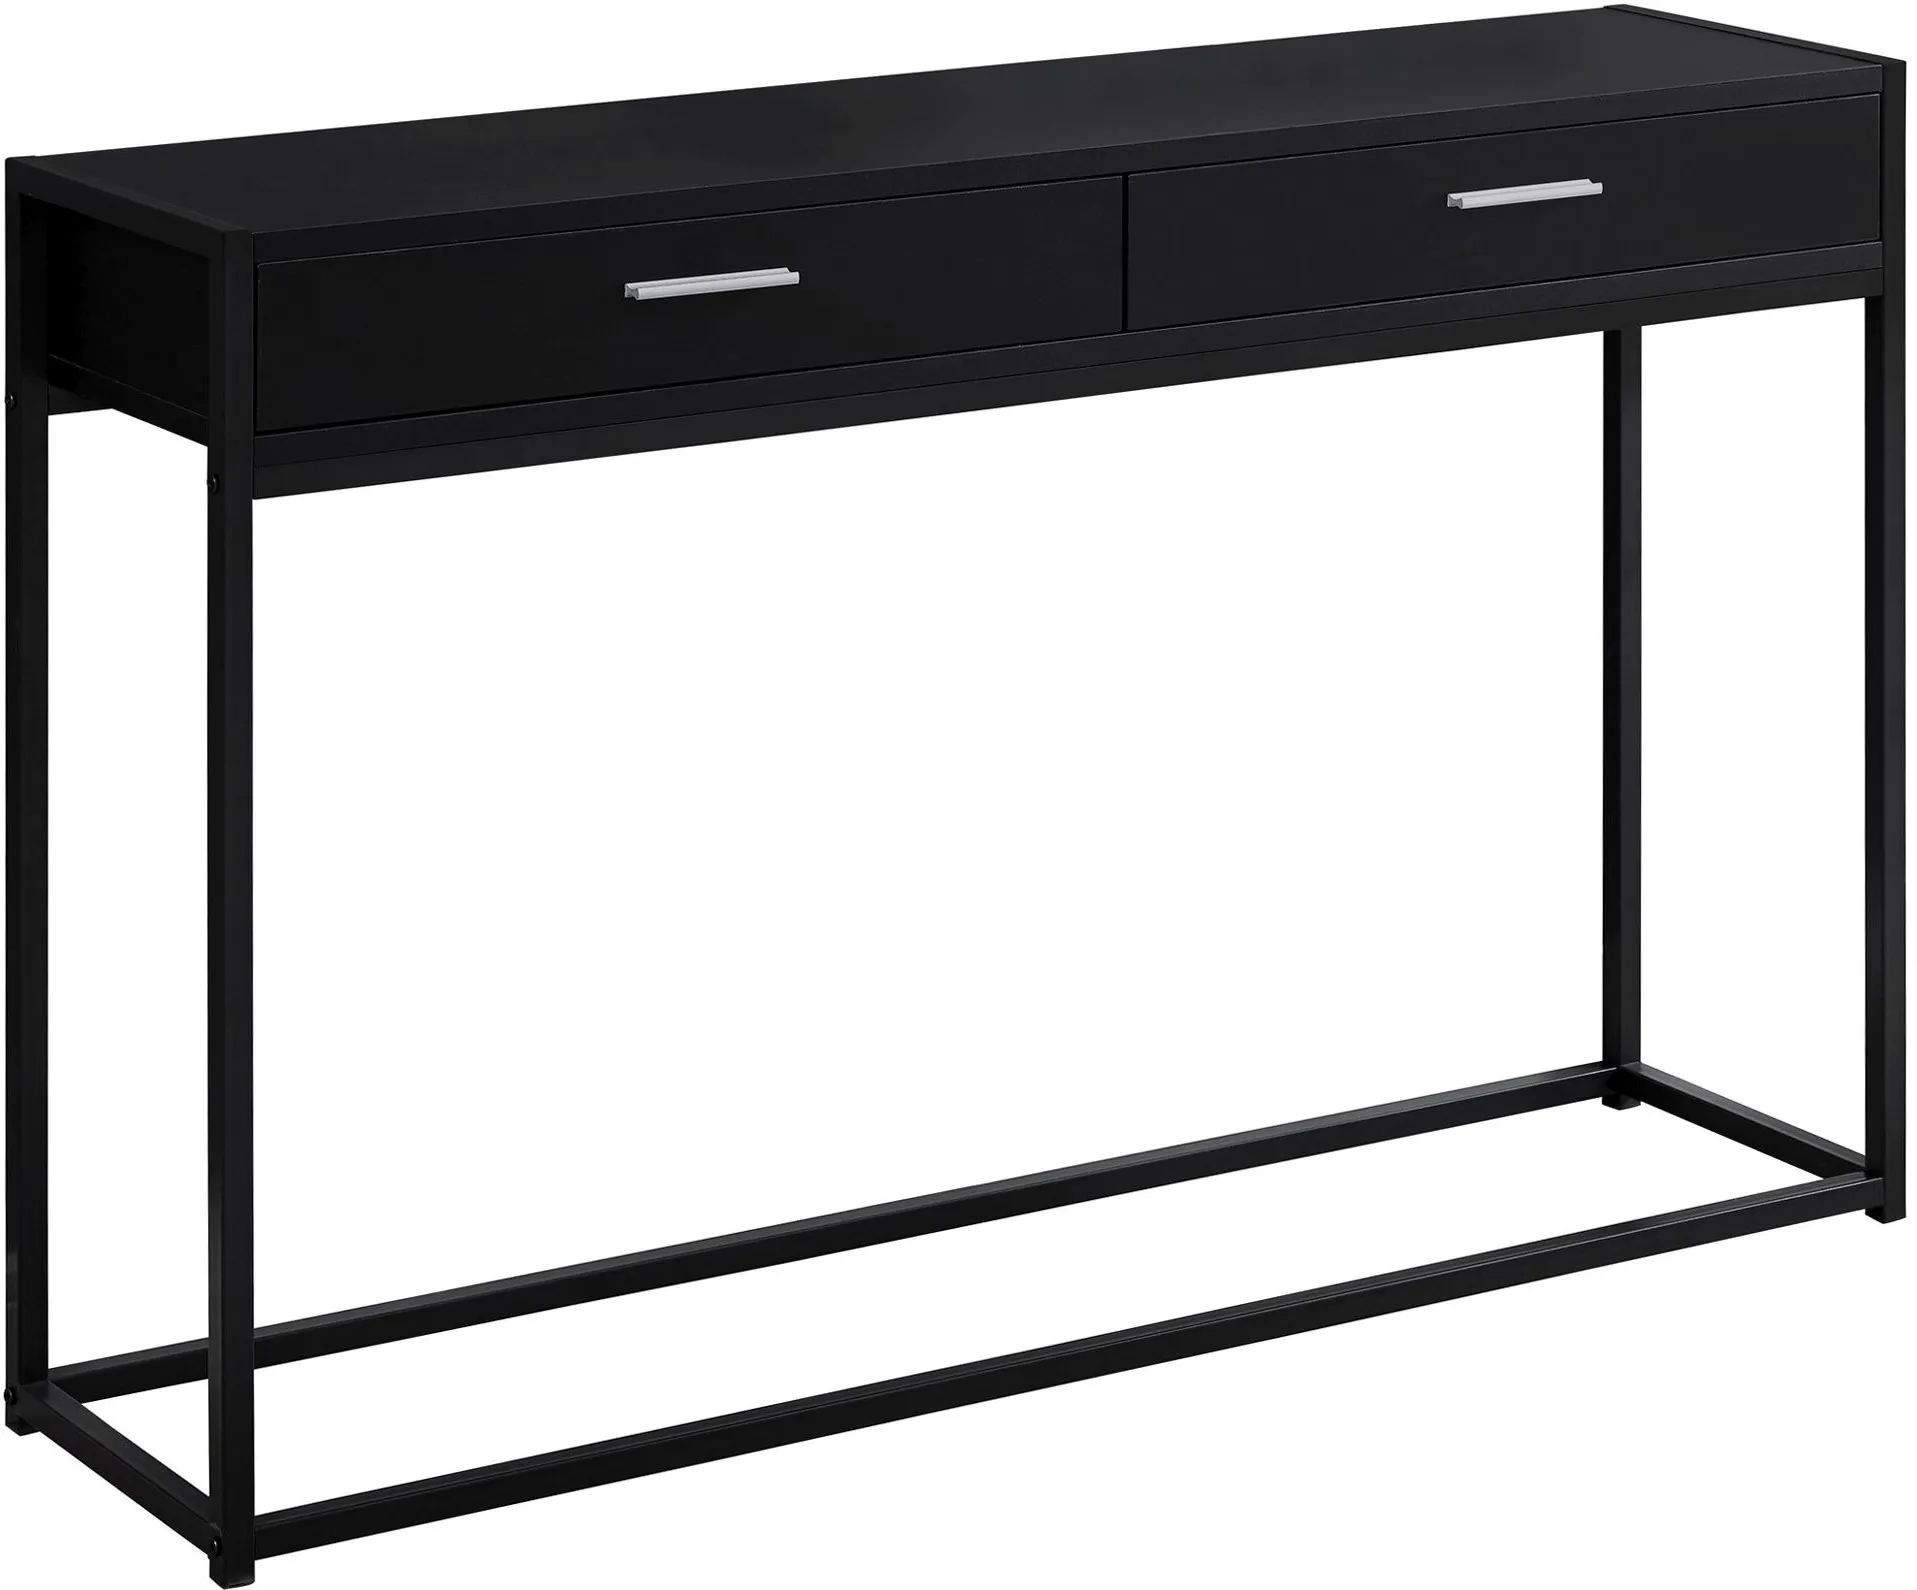 Accent Table, Console, Entryway, Narrow, Sofa, Storage Drawer, Living Room, Bedroom, Metal, Laminate, Black, Contemporary, Modern